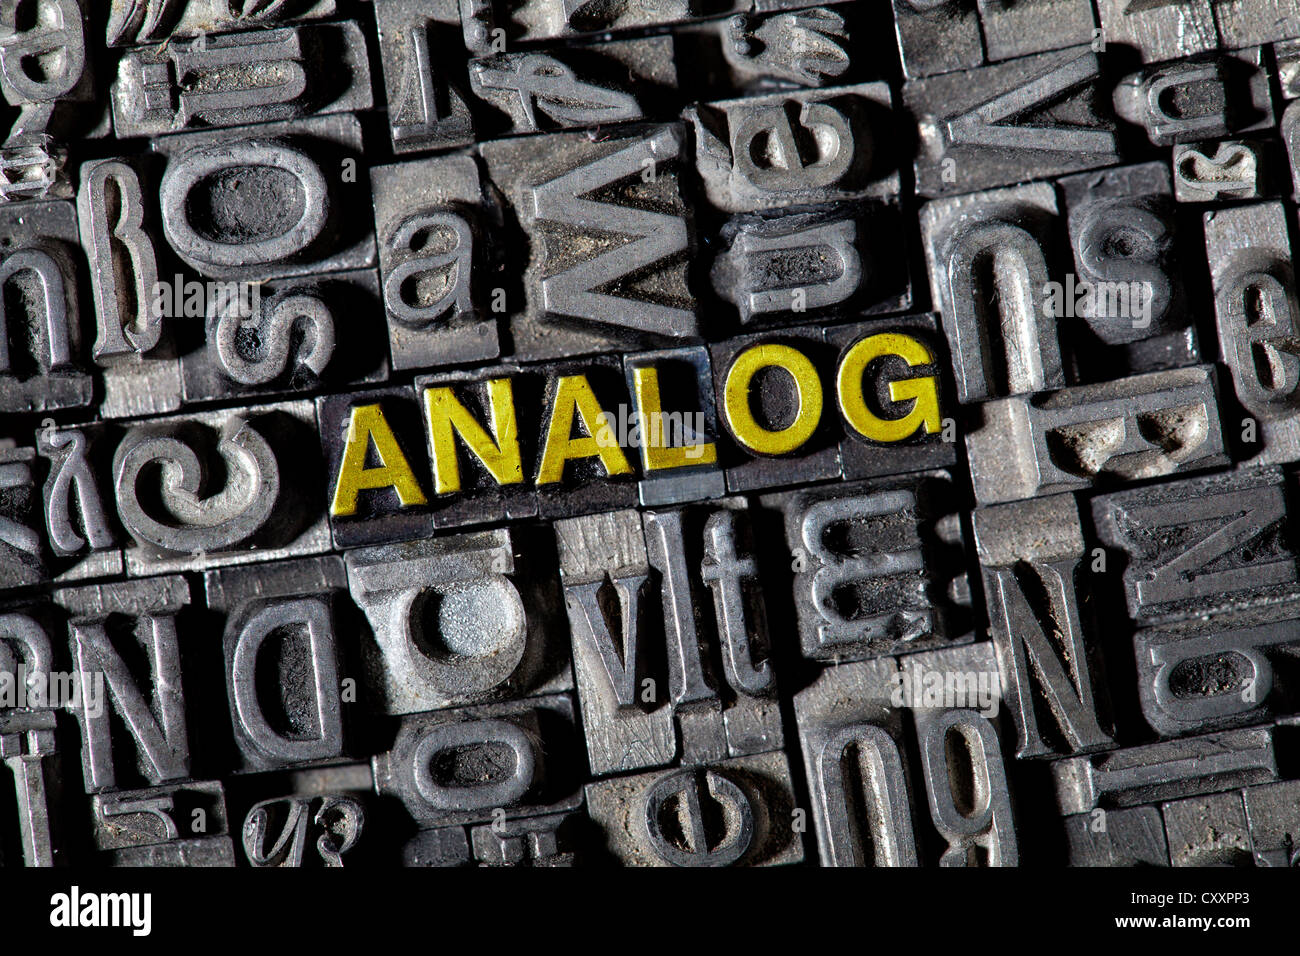 Old lead letters forming the word 'ANALOG', German for 'analogous' Stock Photo